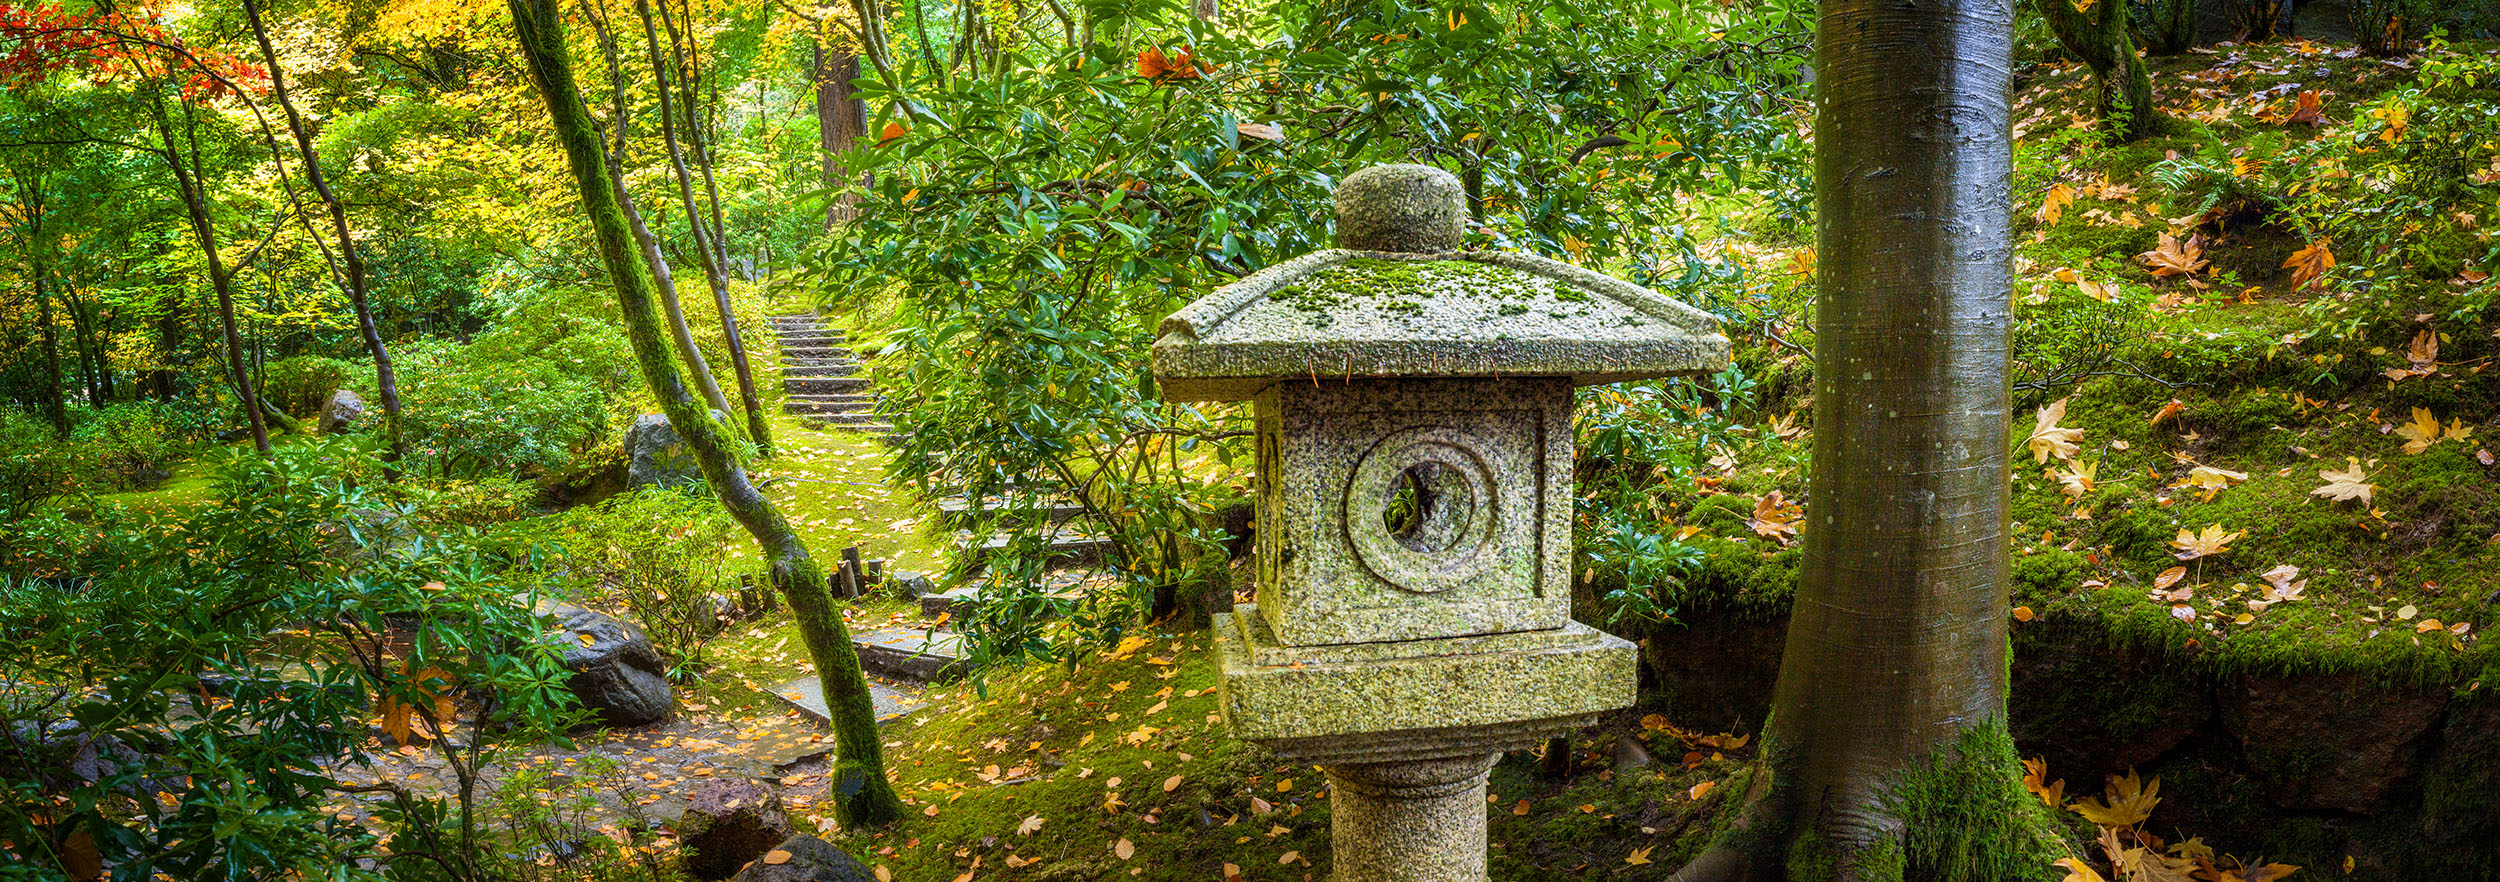 This image, a panoramic composition from the Portland Japanese Garden in Oregon, showcases a stone lantern and a set of stone...